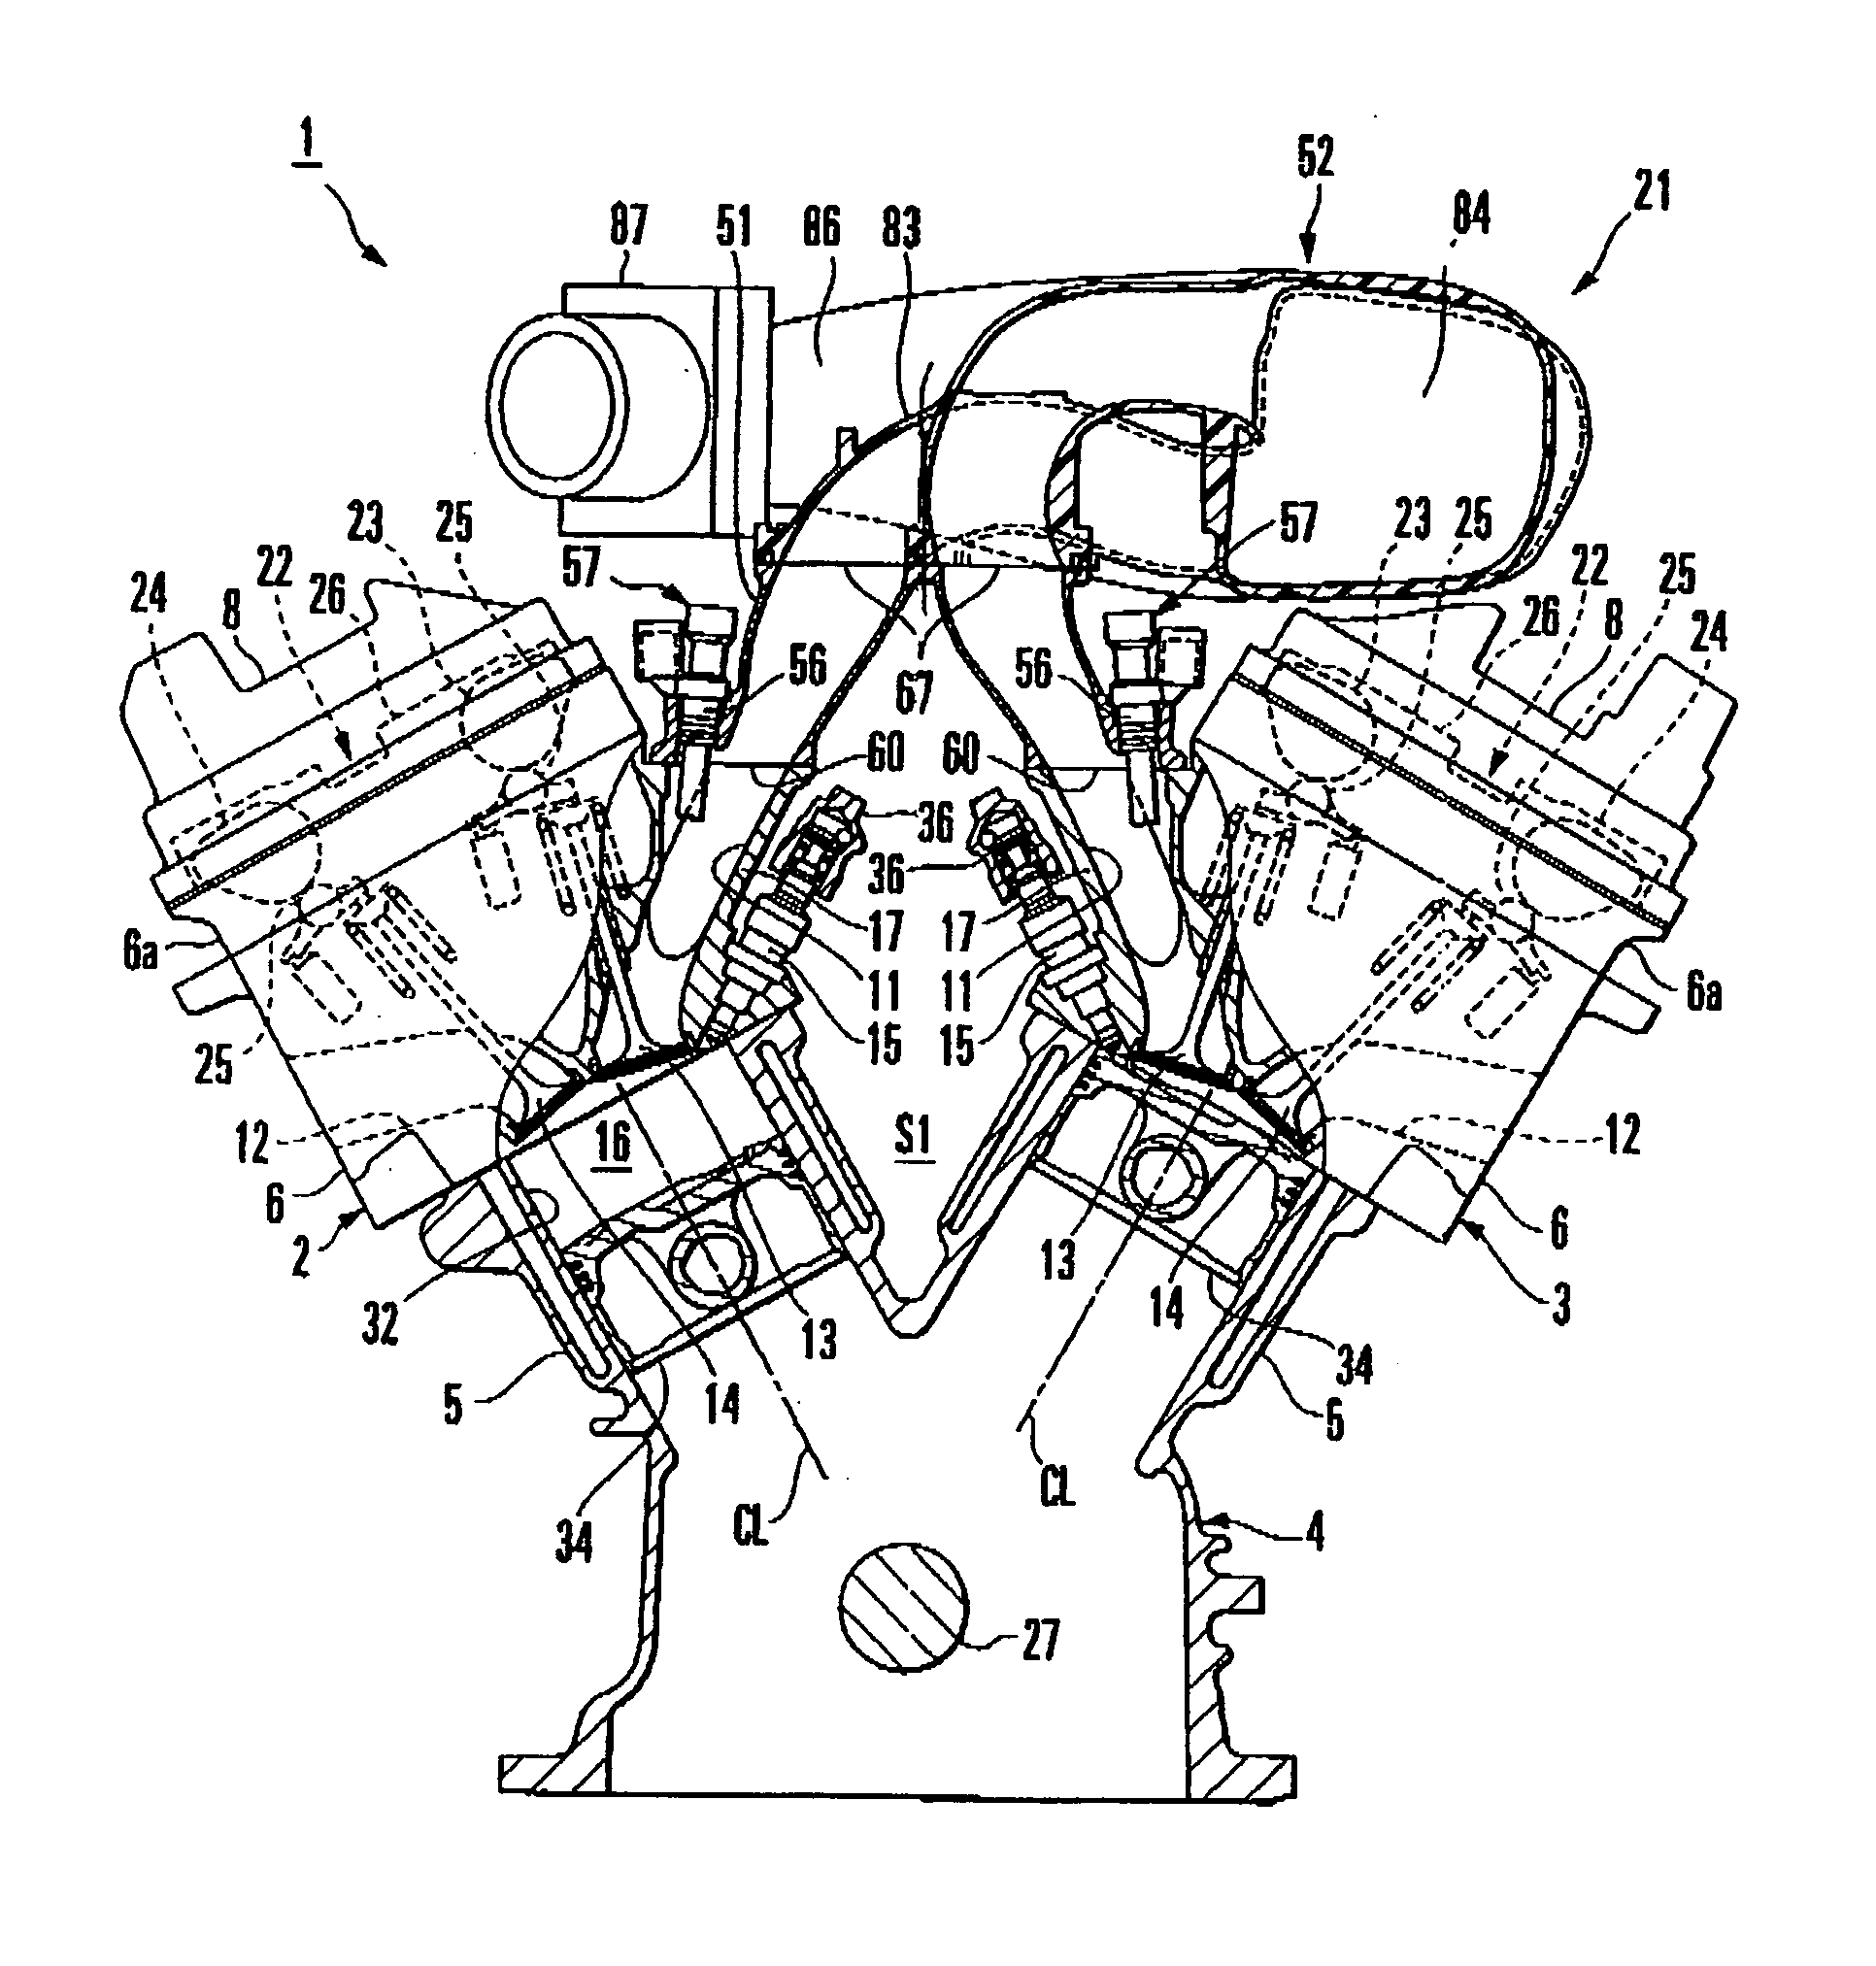 Dual-injector fuel injection engine